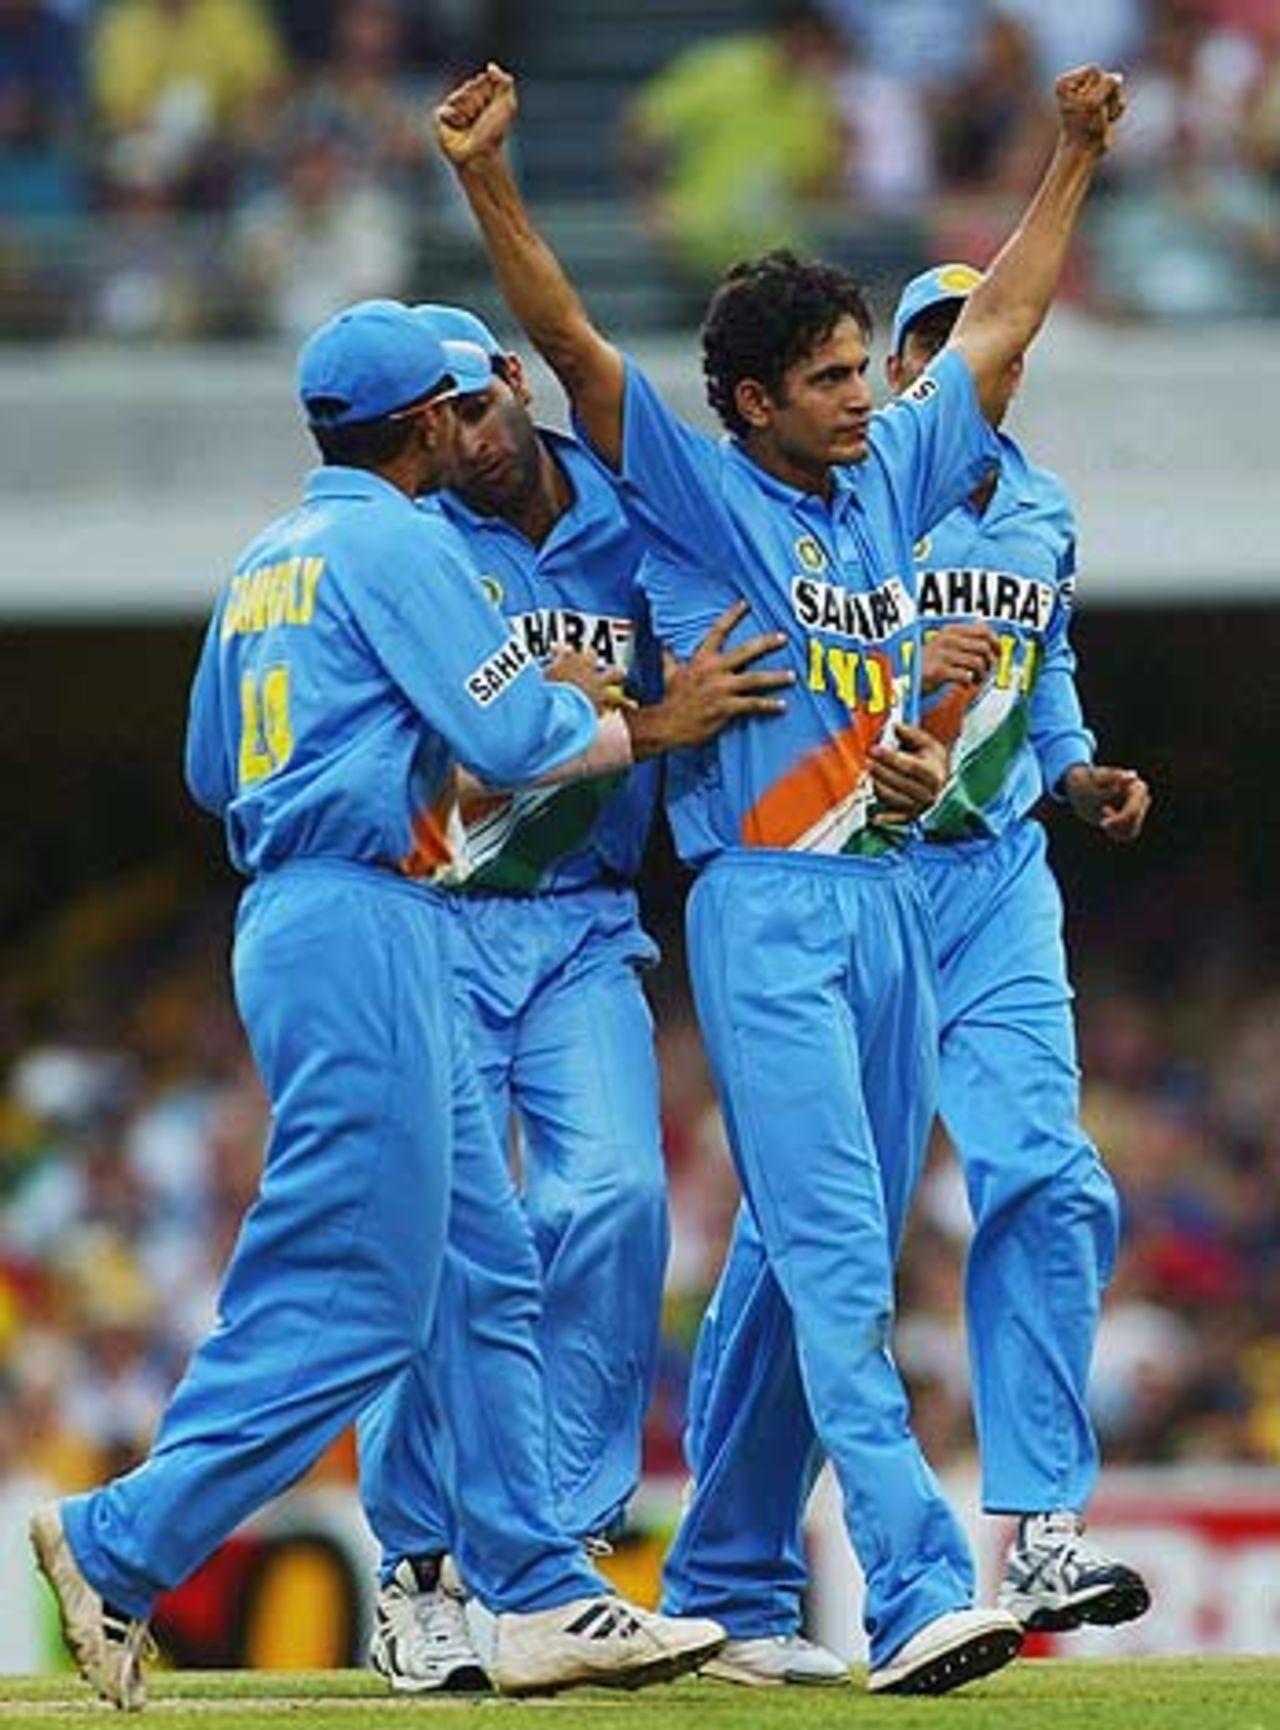 Irfan Pathan makes the breakthrough, as Adam Gilchrist is out, Australia v India, VB Series, Brisbane, 5th ODI, January 18, 2004